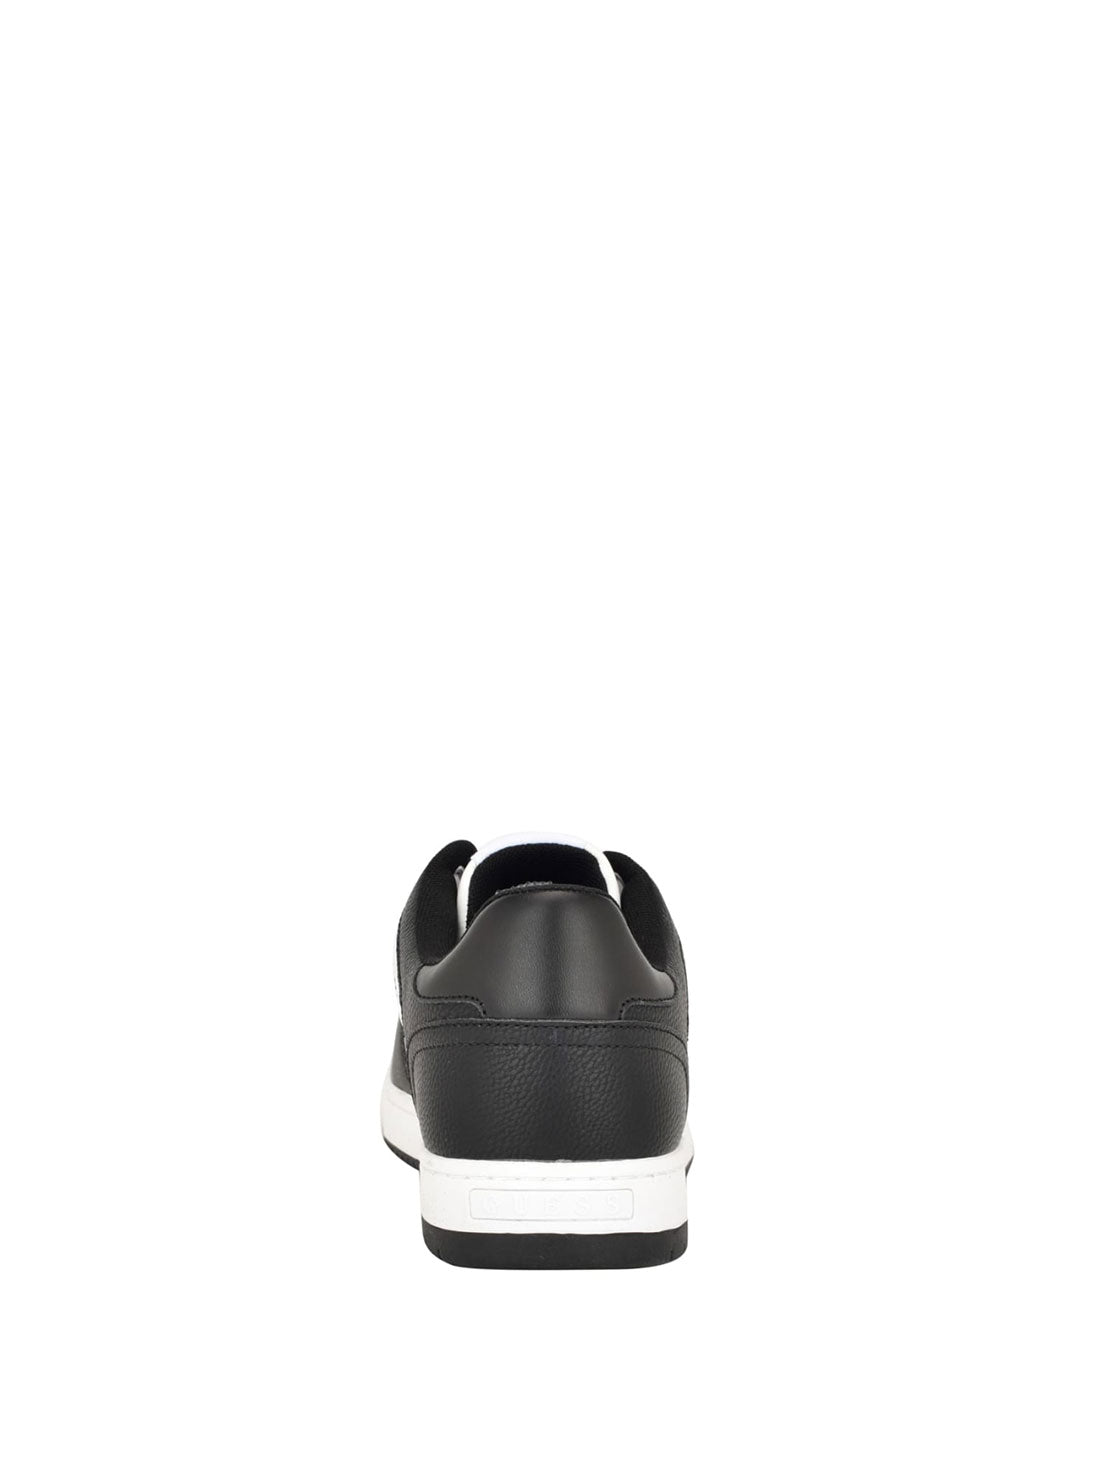 GUESS White Black Tarky Low-Top Sneakers back view